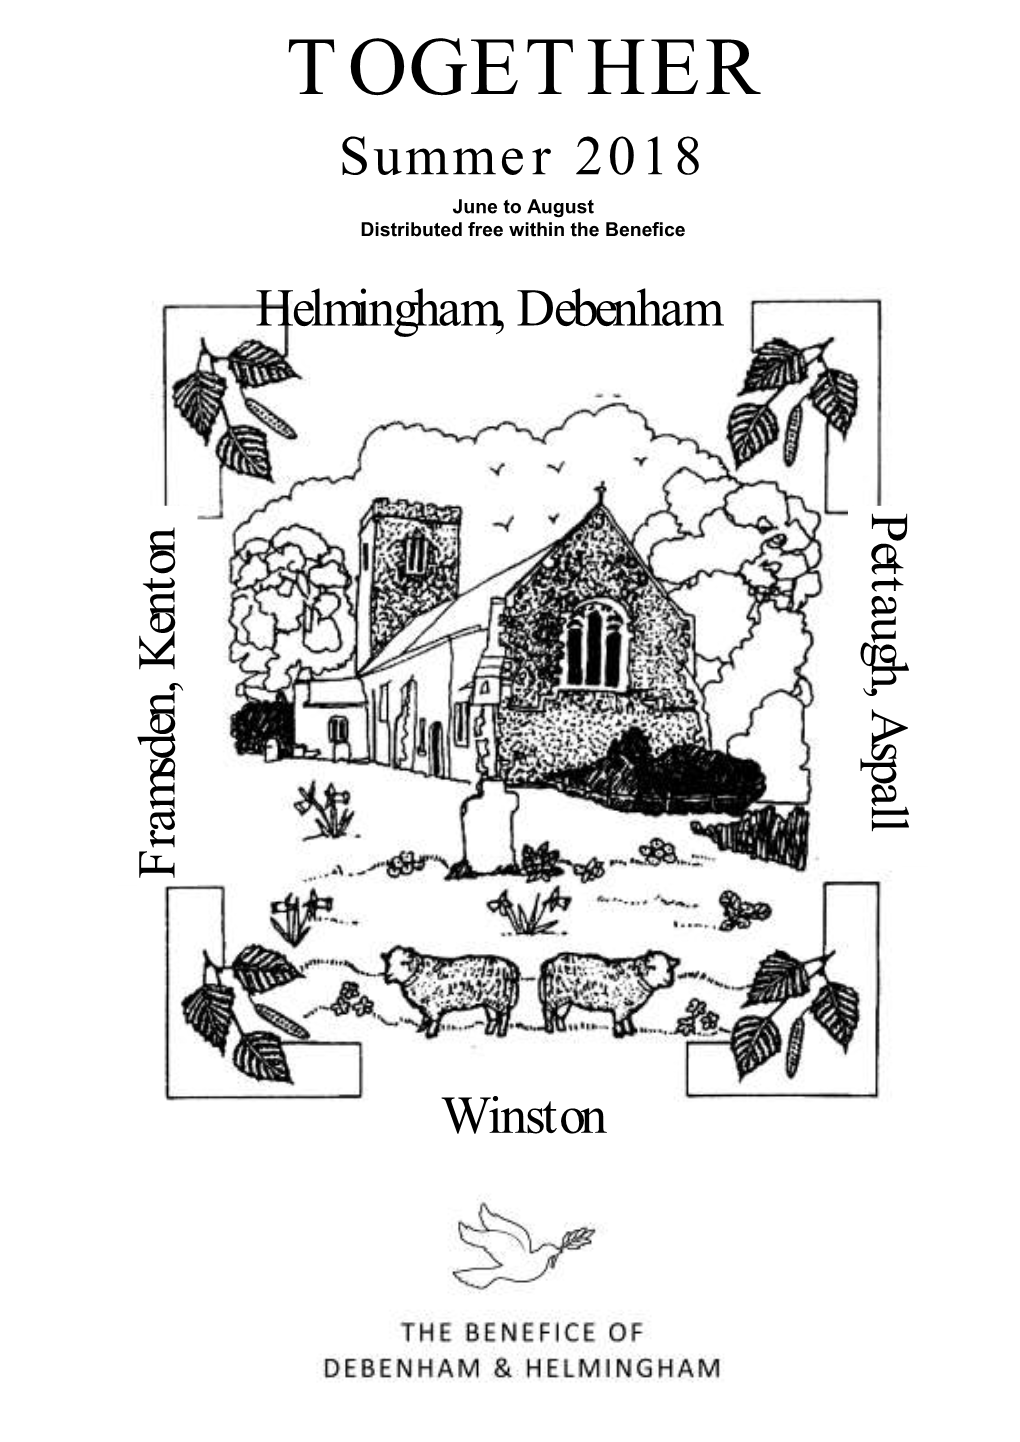 TOGETHER Summer 2018 June to August Distributed Free Within the Benefice Helmingham, Debenham